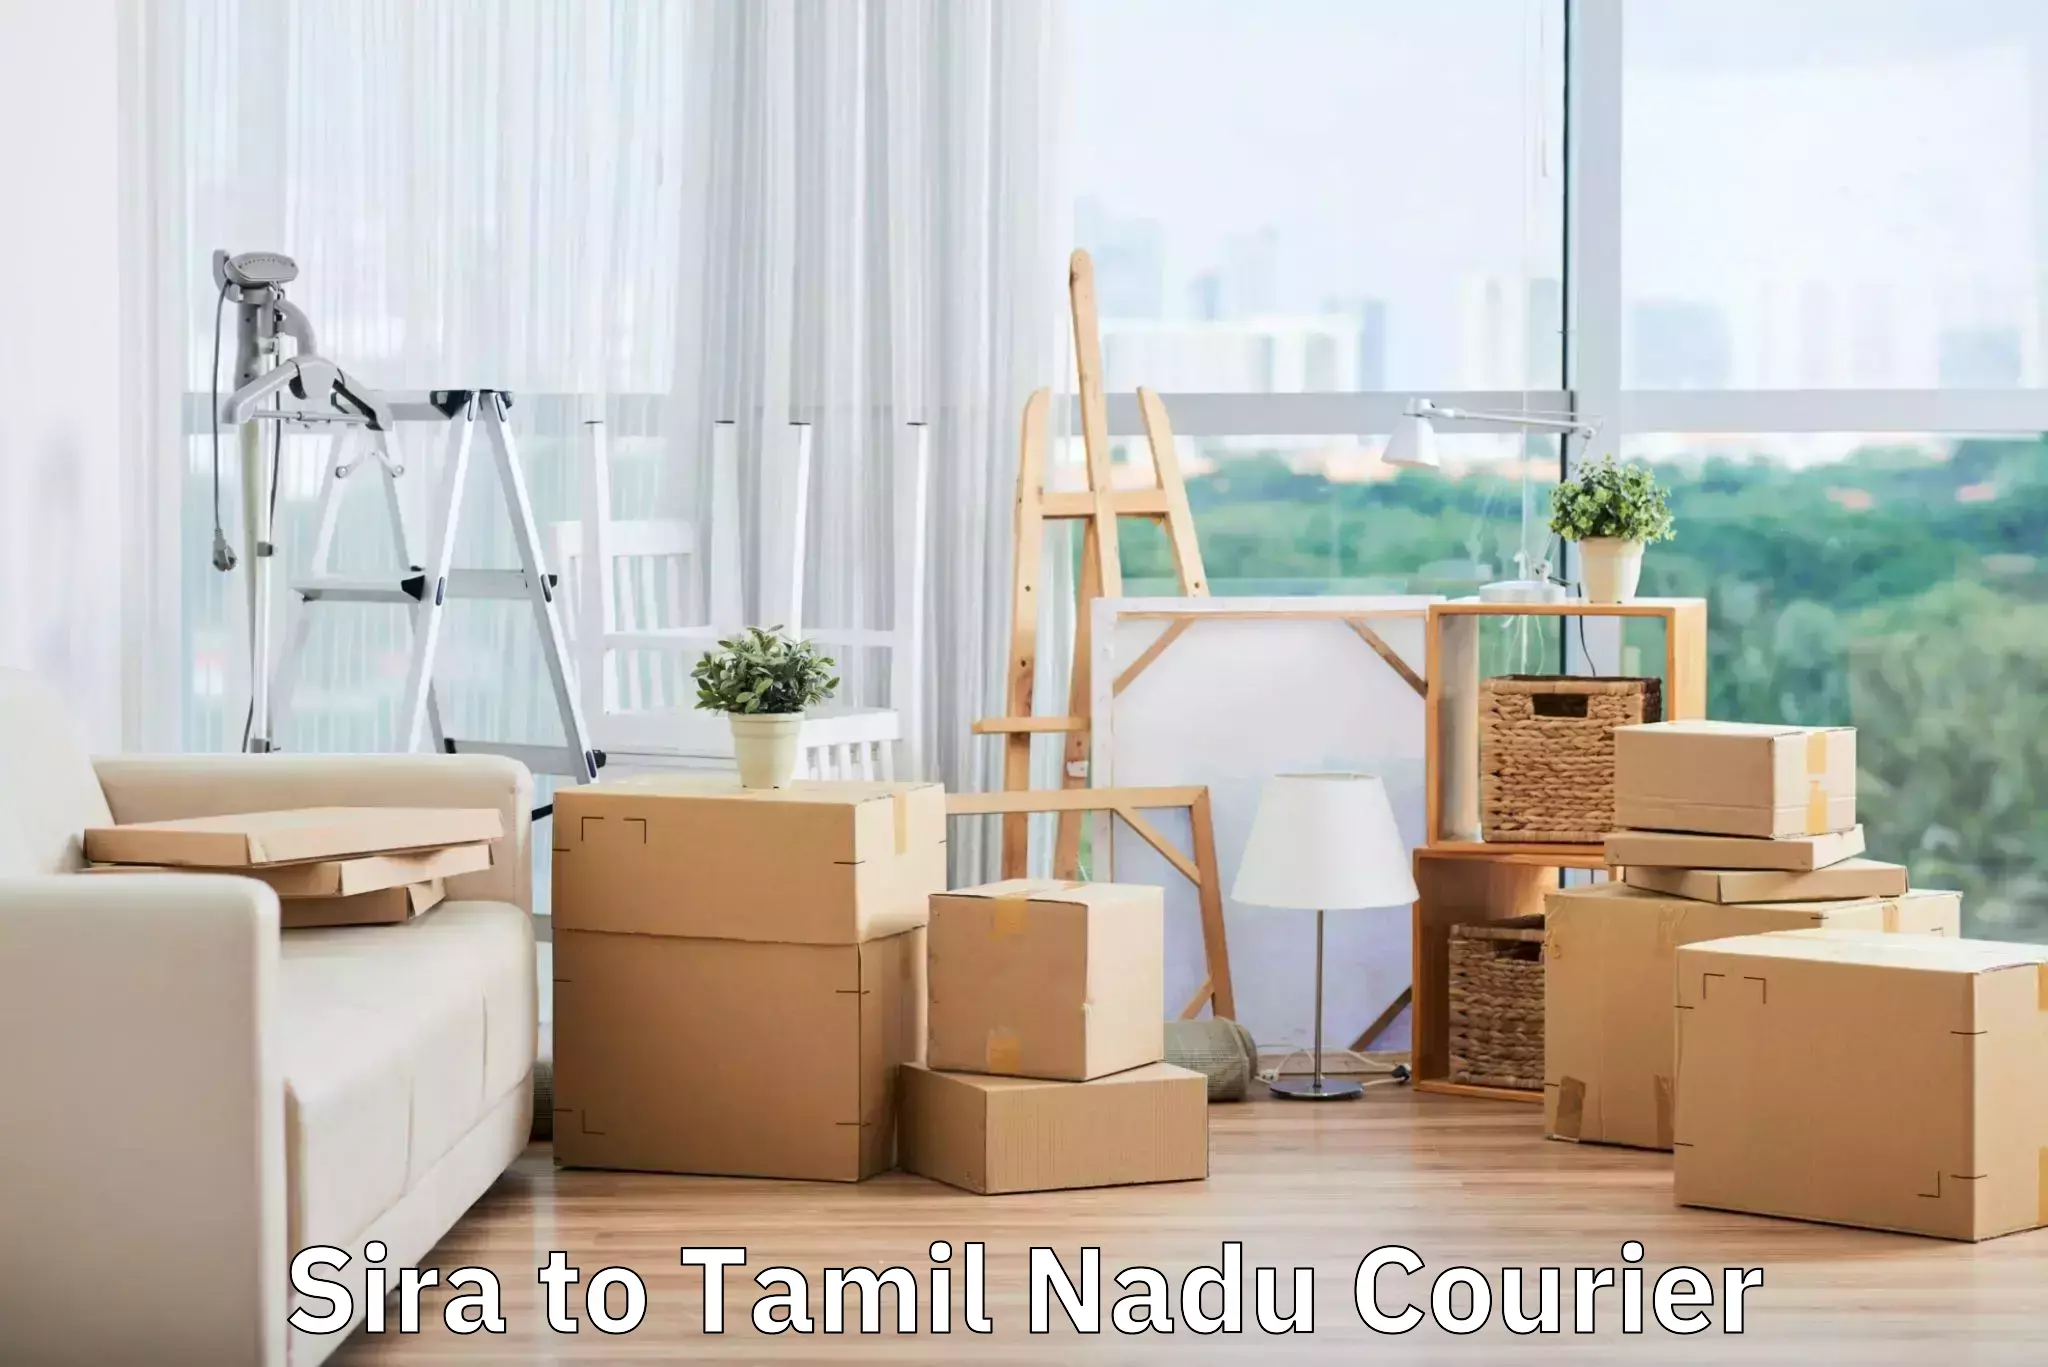 Luggage transport consultancy Sira to Tamil Nadu